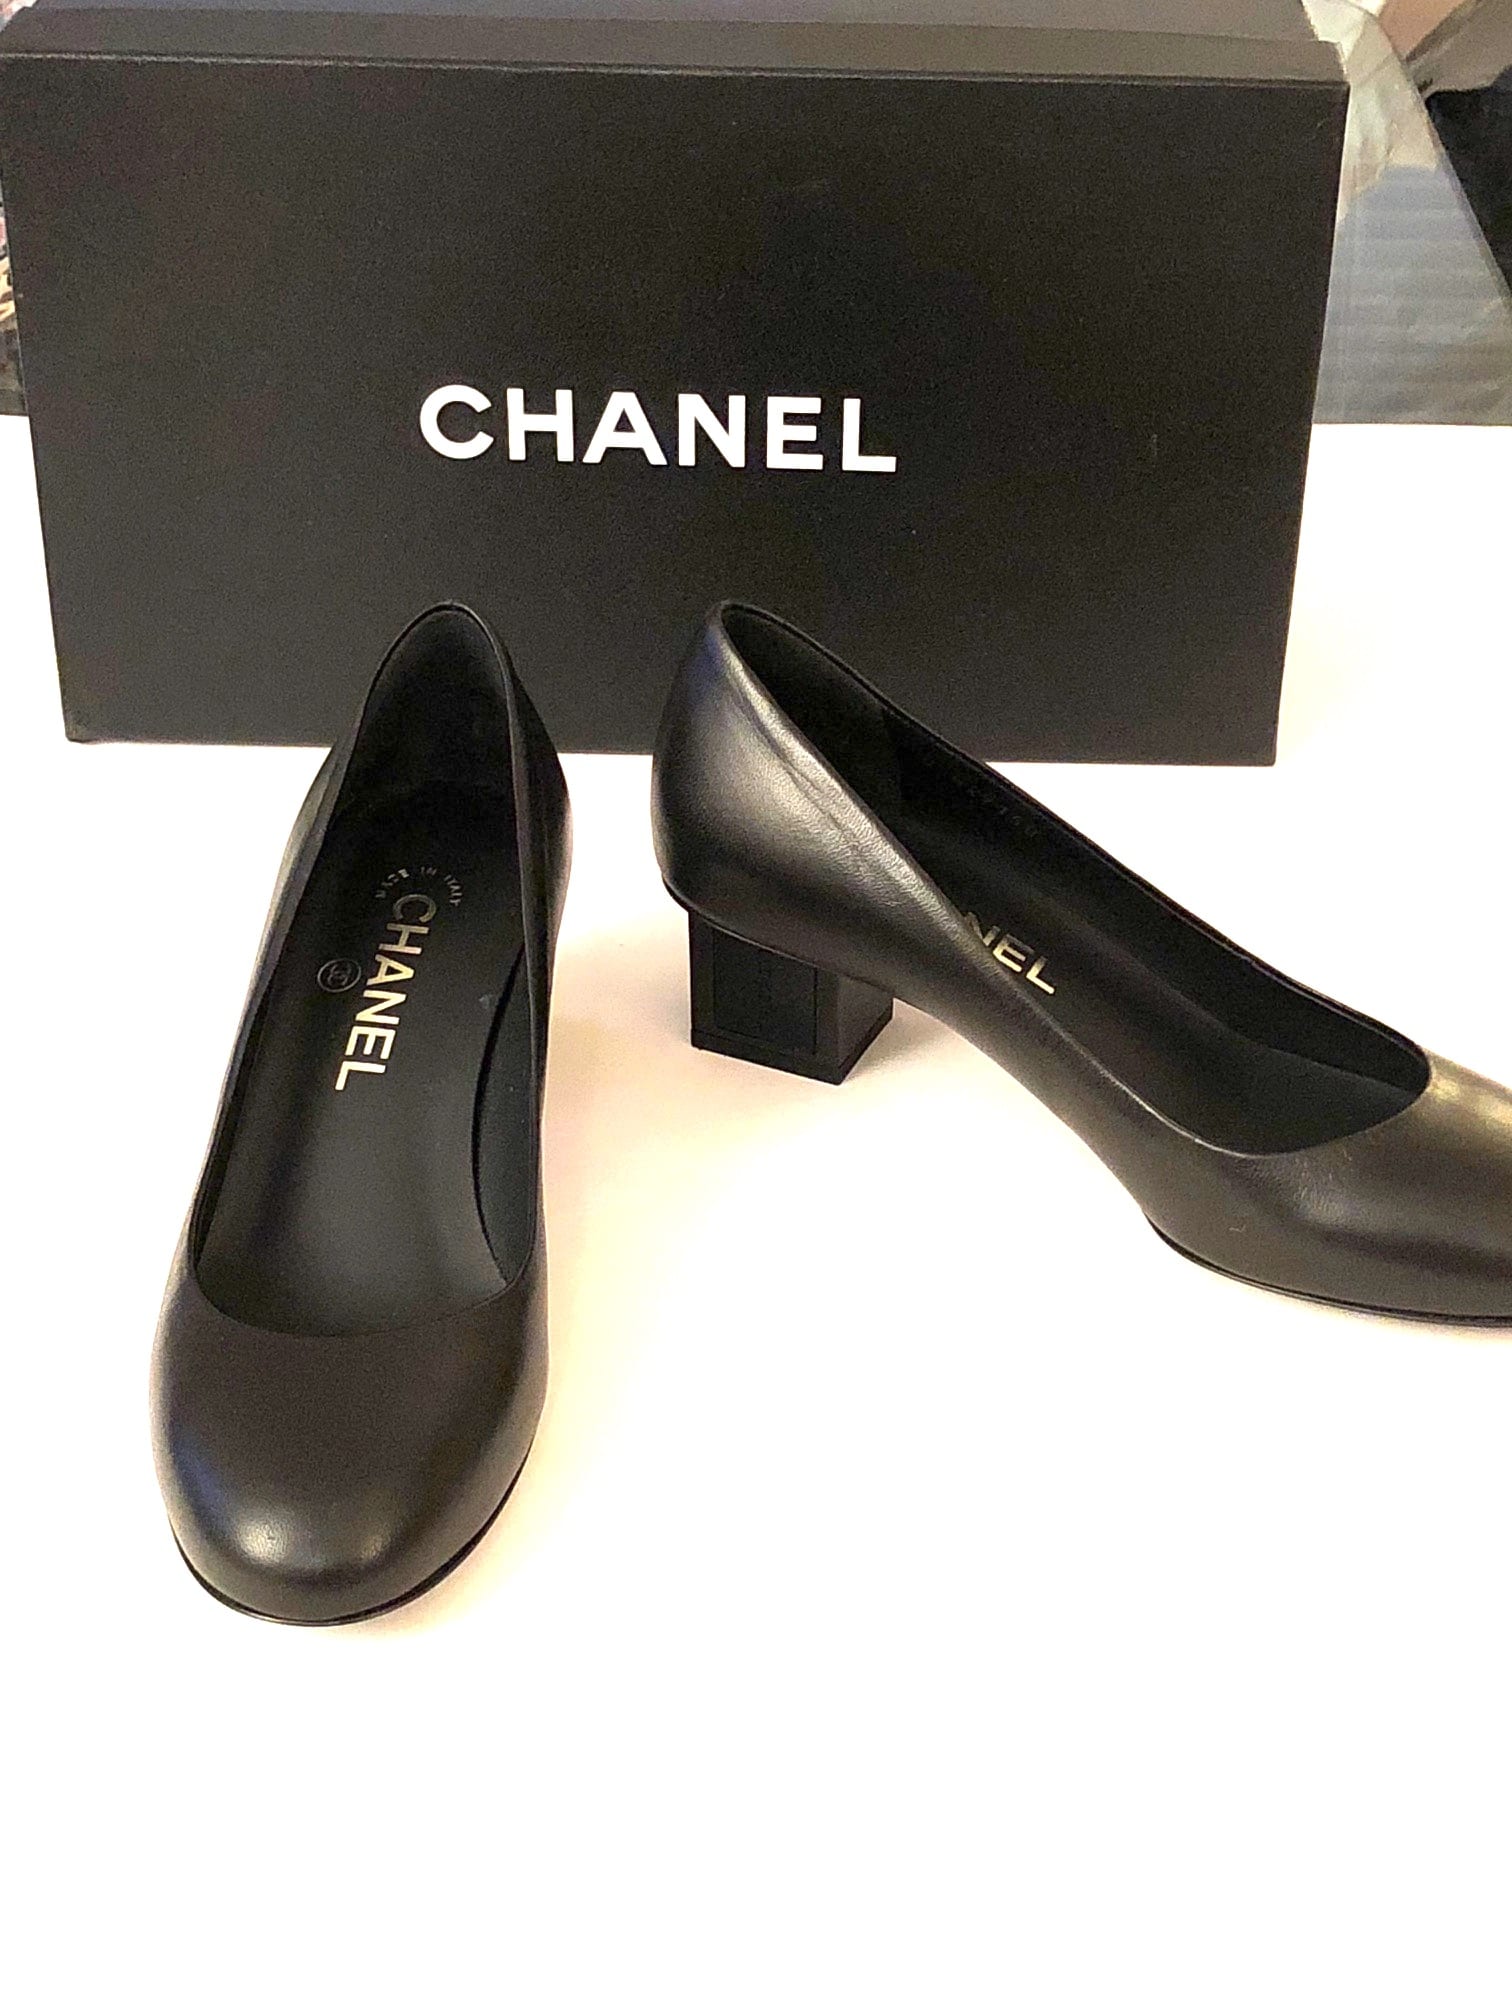 CHANEL, BLACK LEATHER PUMP WITH SQUARE HEEL  NEW IN BOX-SIZE-37